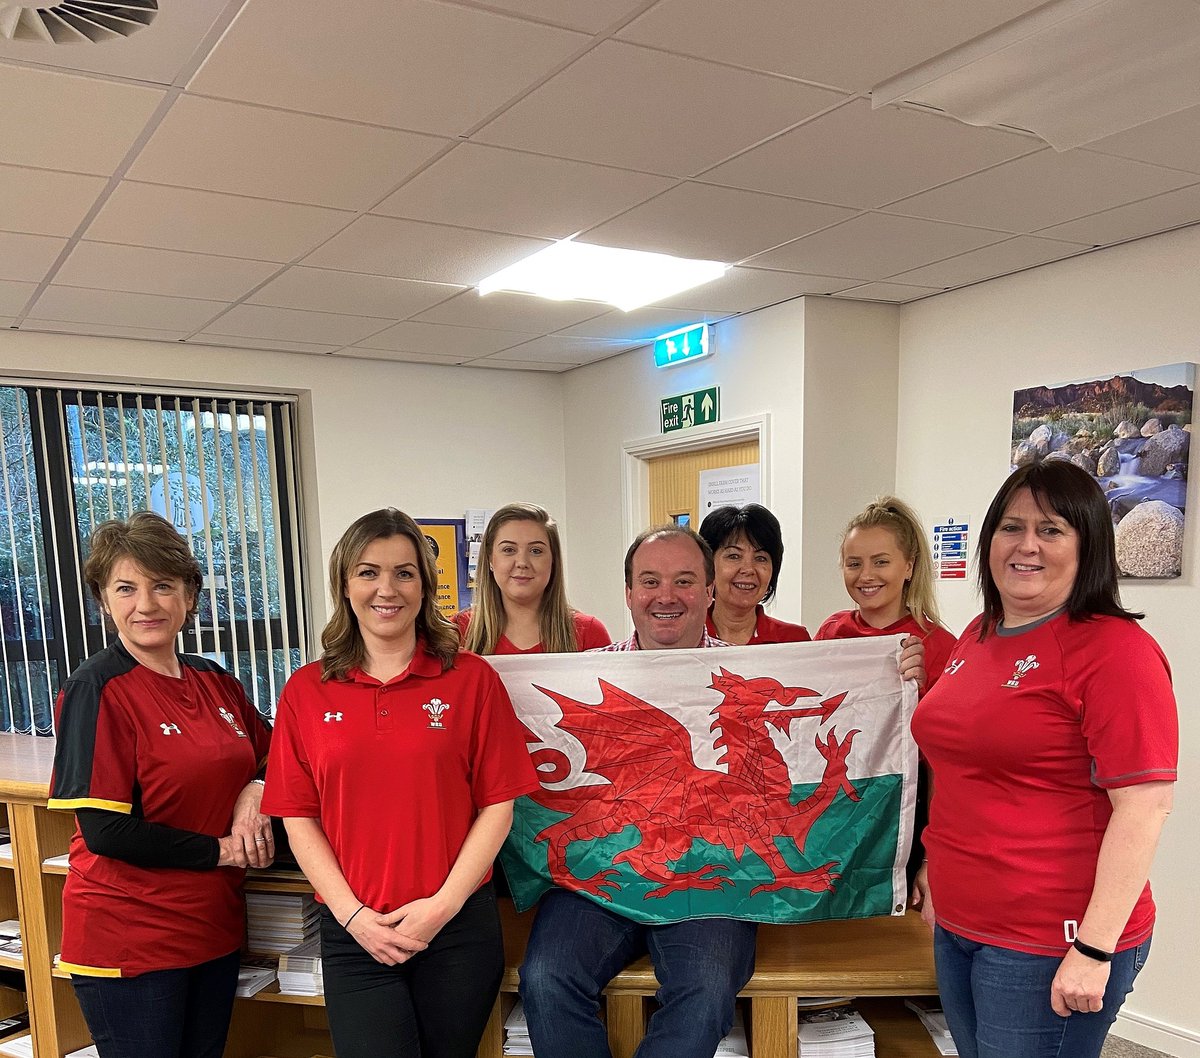 We are all wearing red here in Llantrisant in support for the amazing work that  @Velindre  do and also to wish the  @WelshRugbyUnion  boys the best of luck in their 6 Nations game against Italy tomorrow! Pob lwc i dîm Cymru yfory! #WearRedForWalesAndVelindre @nfum  @NFUCymru